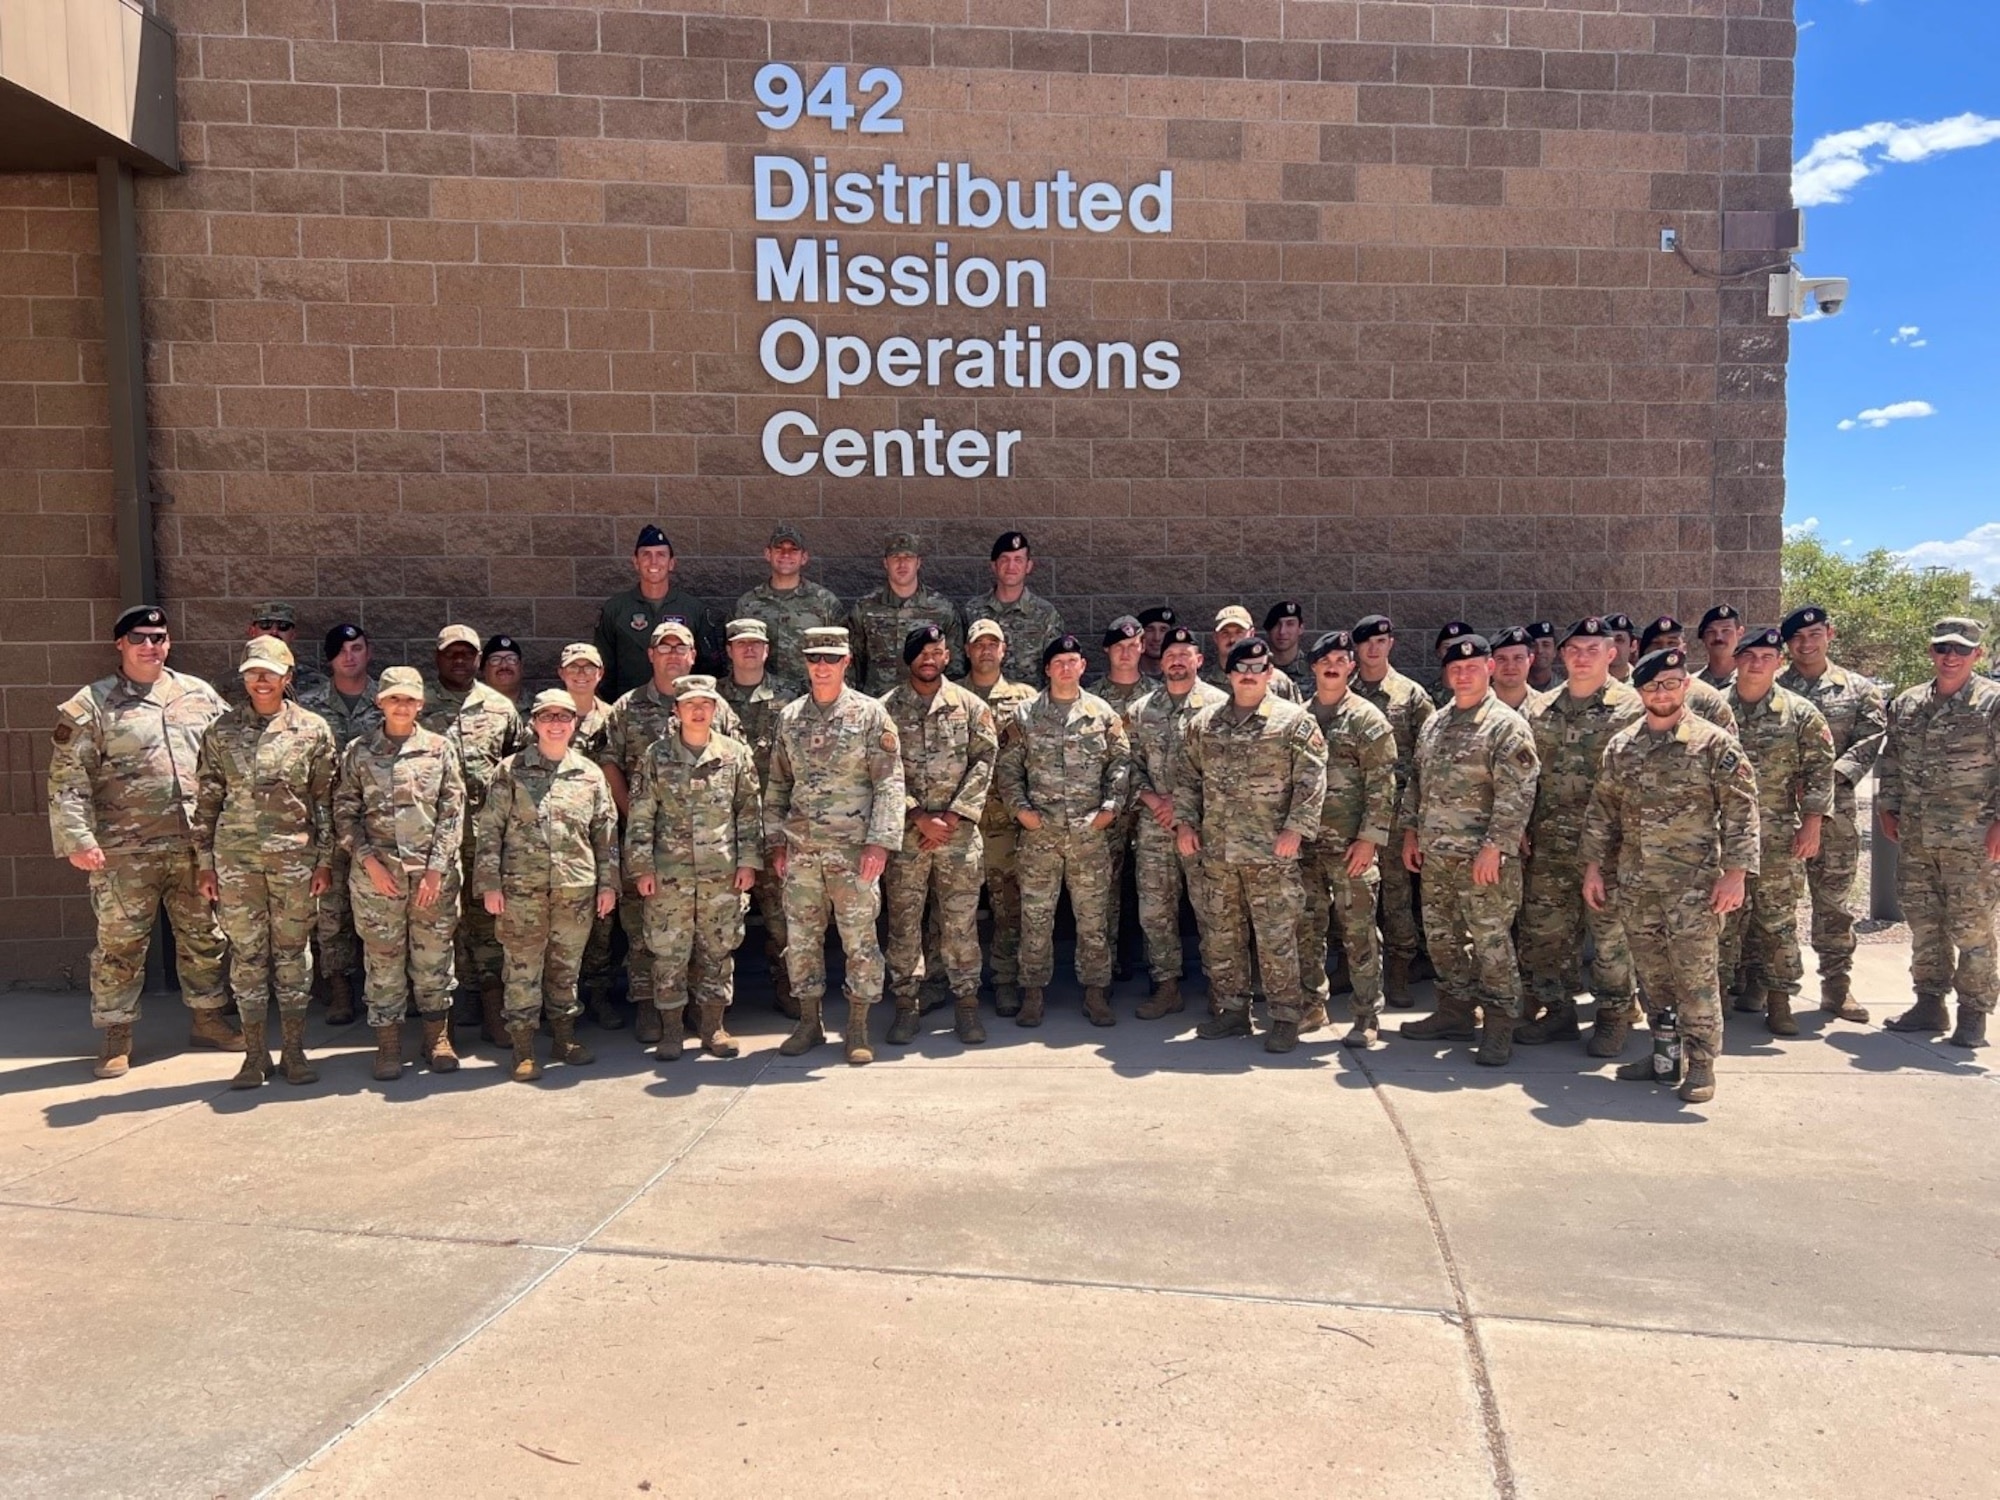 photo of a large group of military members in front of building that says 942 Distributed Mission Operations center